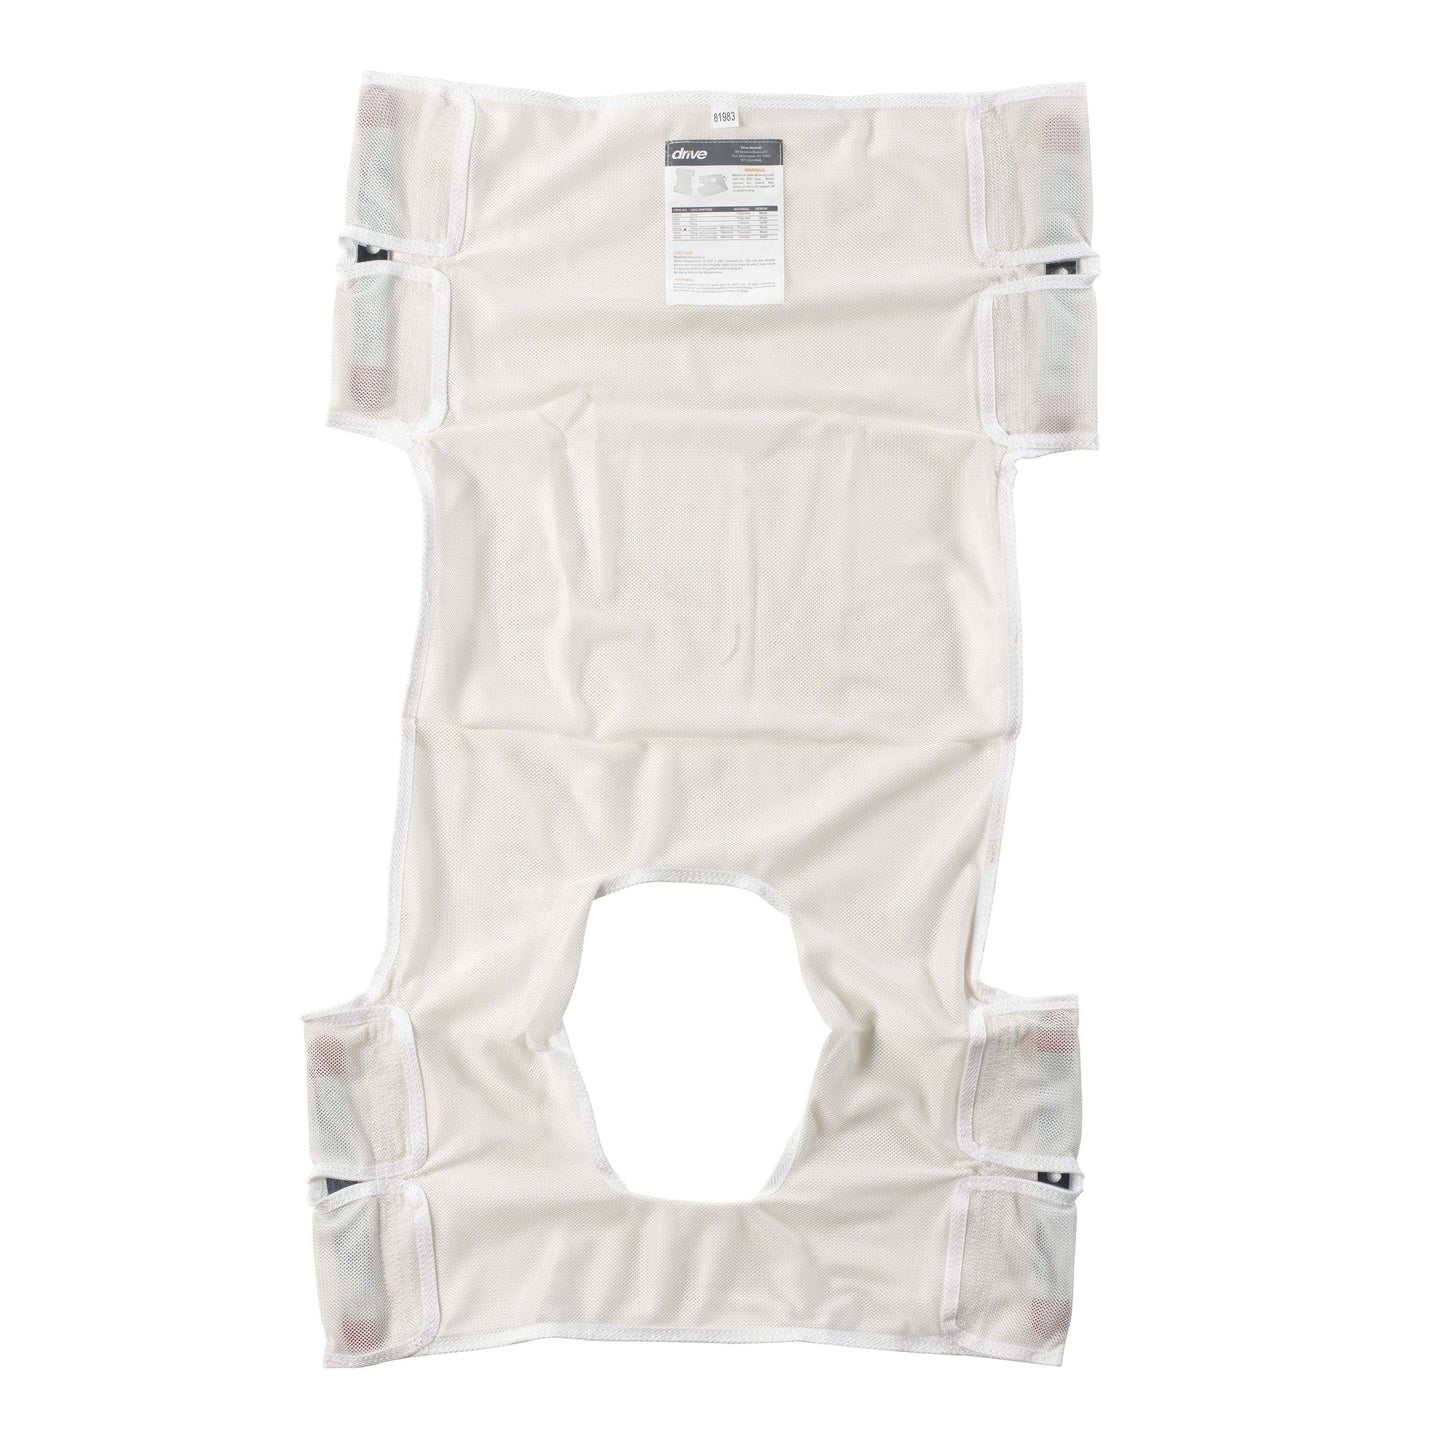 Drive 13026 Patient Lift Sling, Polyester Mesh with Commode Cutout